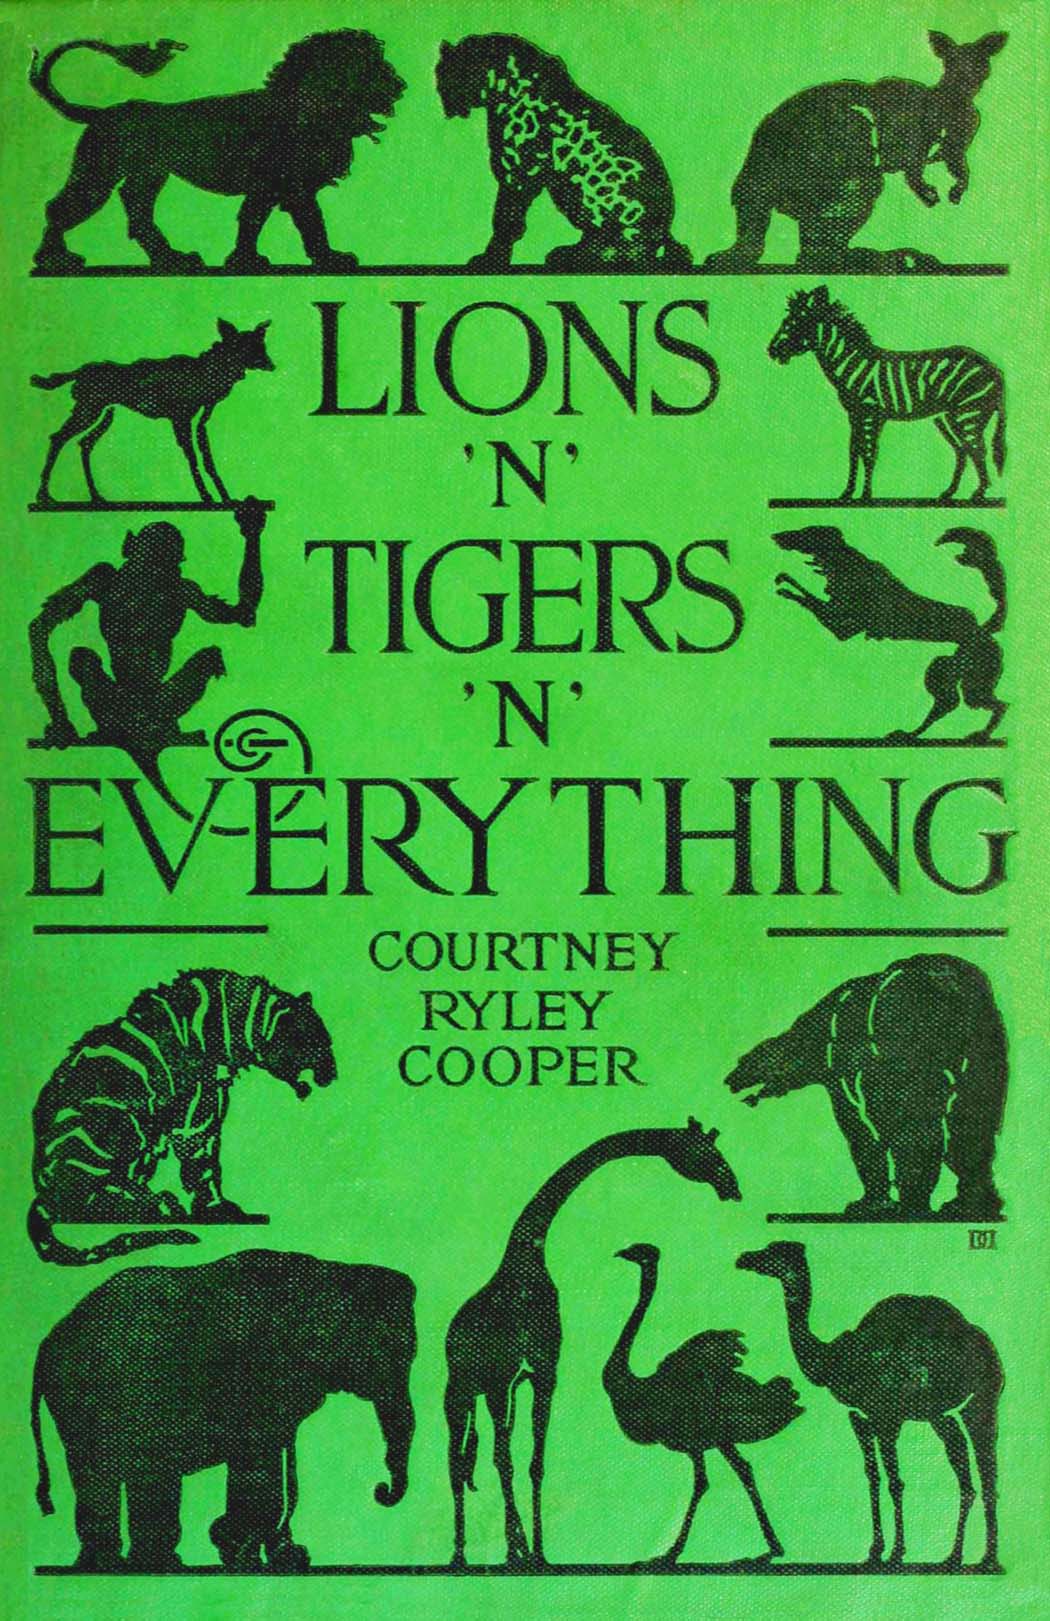 Lions n tigers n everything Project Gutenberg